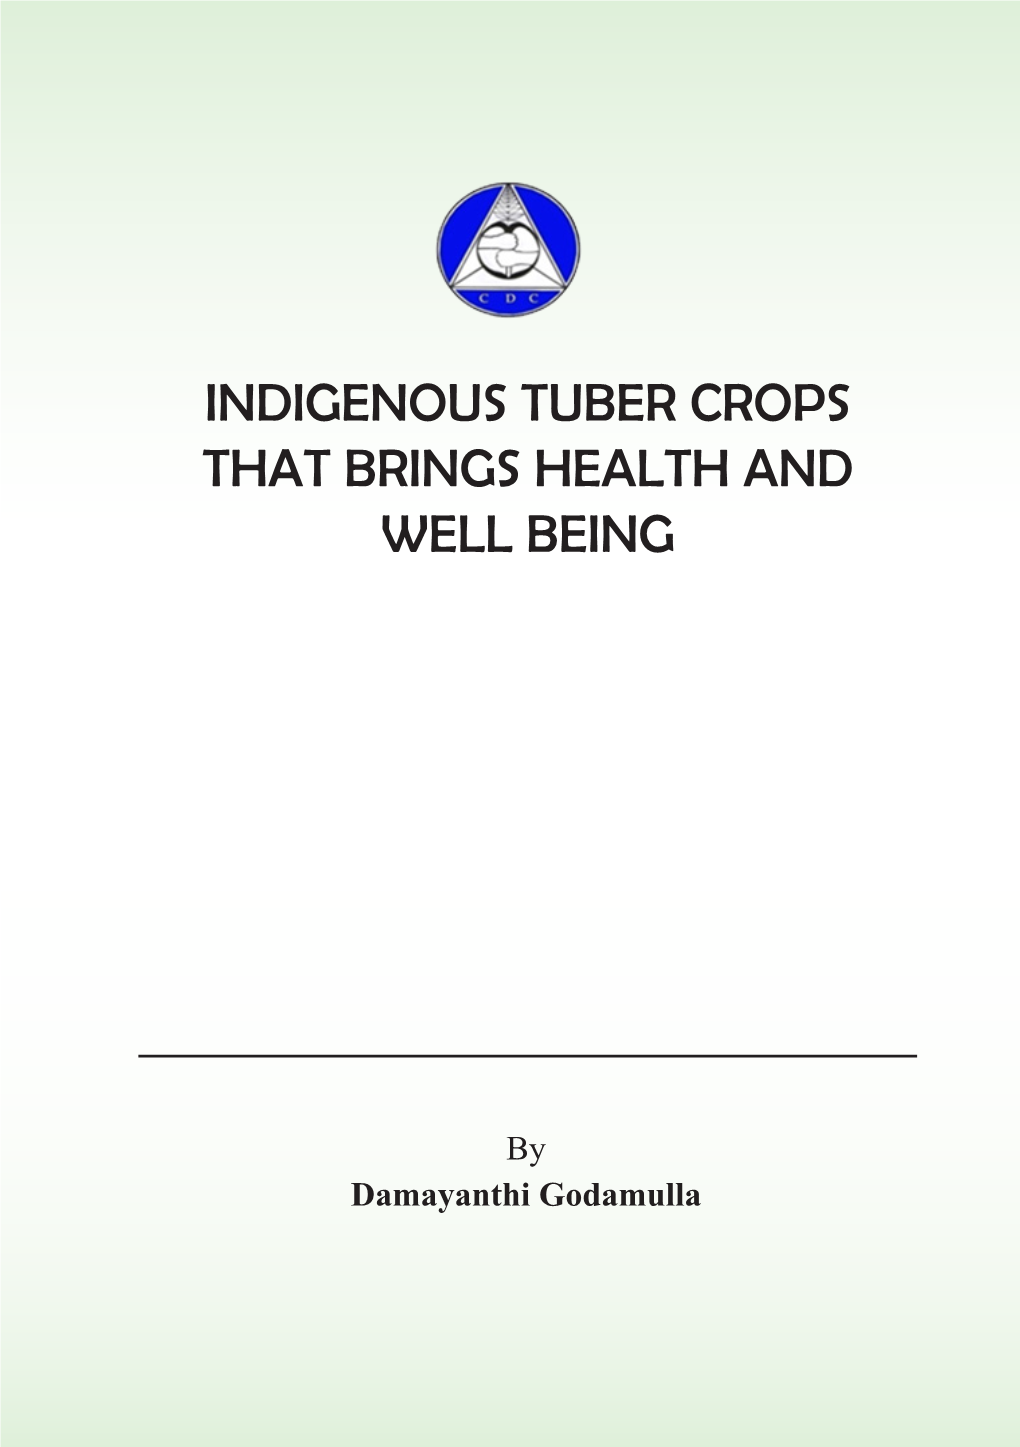 Indigenous Tuber Crops That Brings Health and Well Being